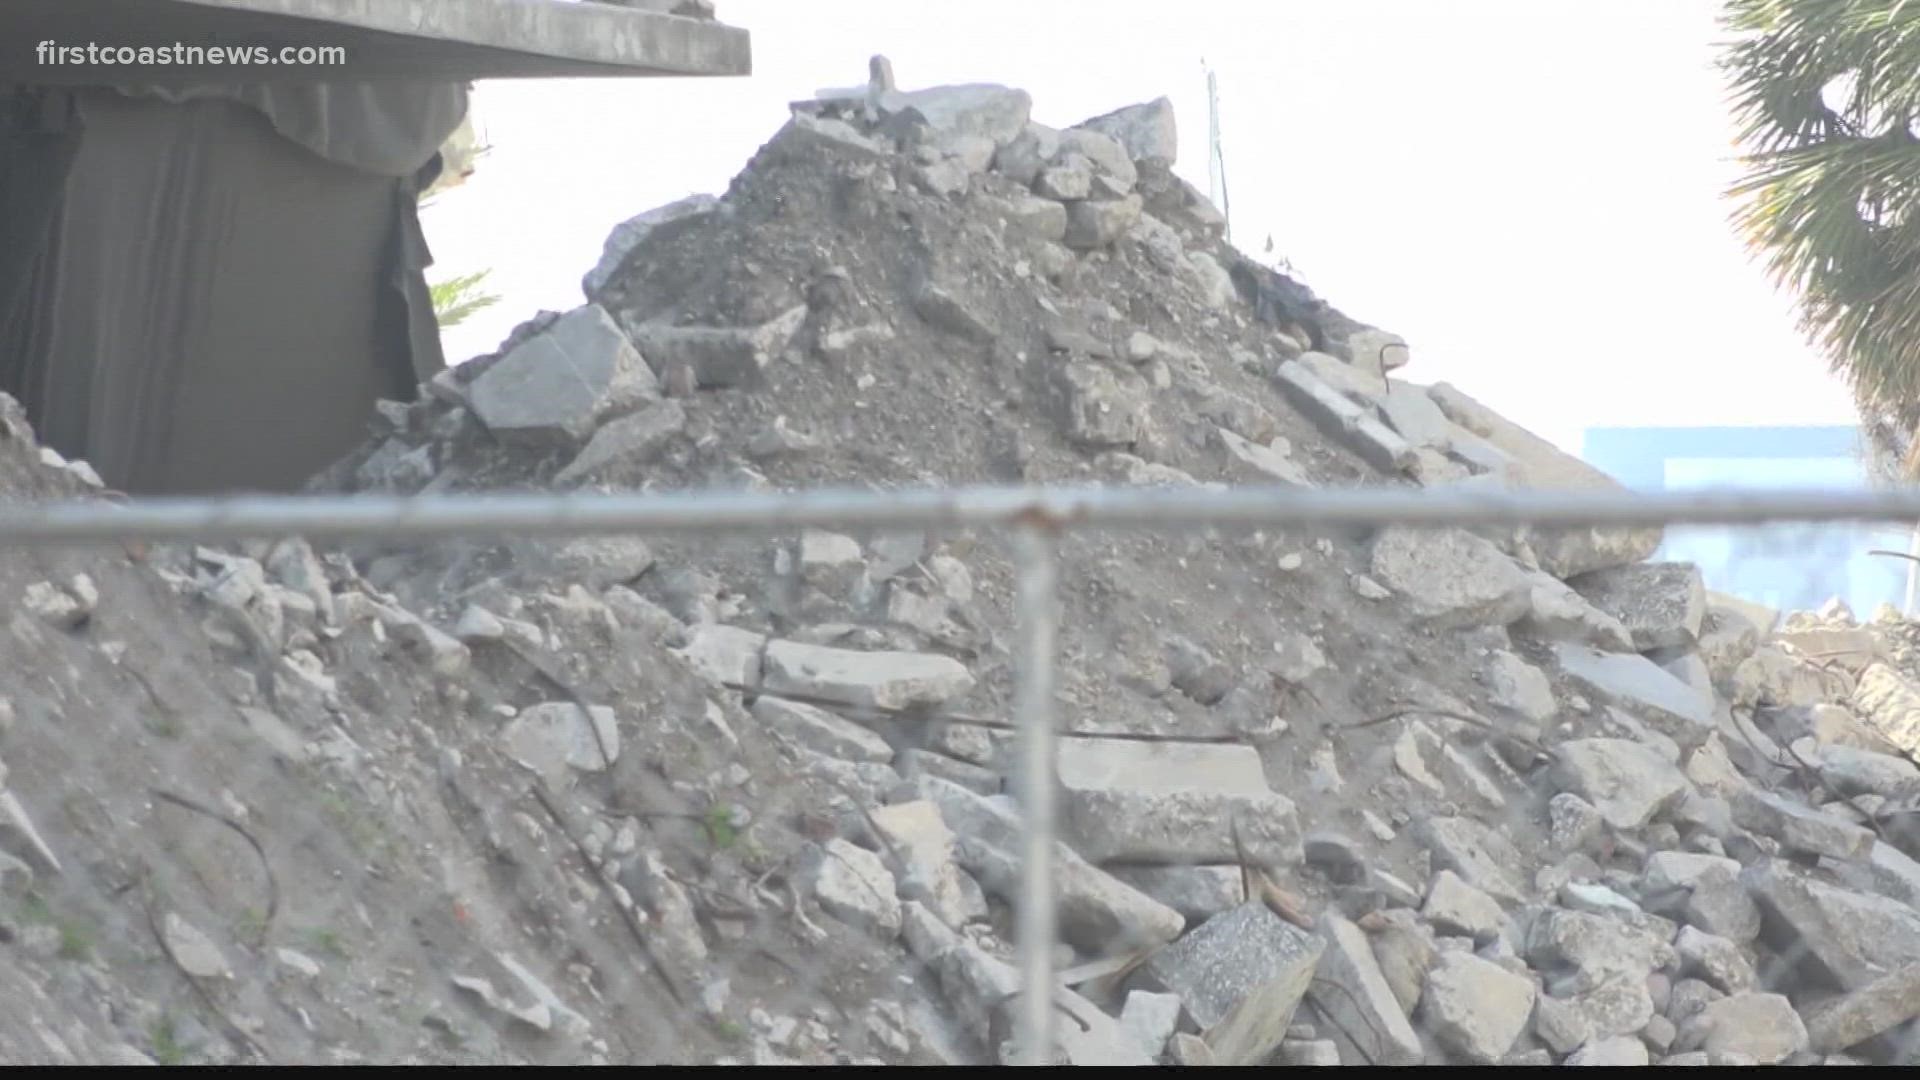 A structural engineer believes the biggest threat to Berkman Plaza during the implosion of Berkman 2 will be dust.